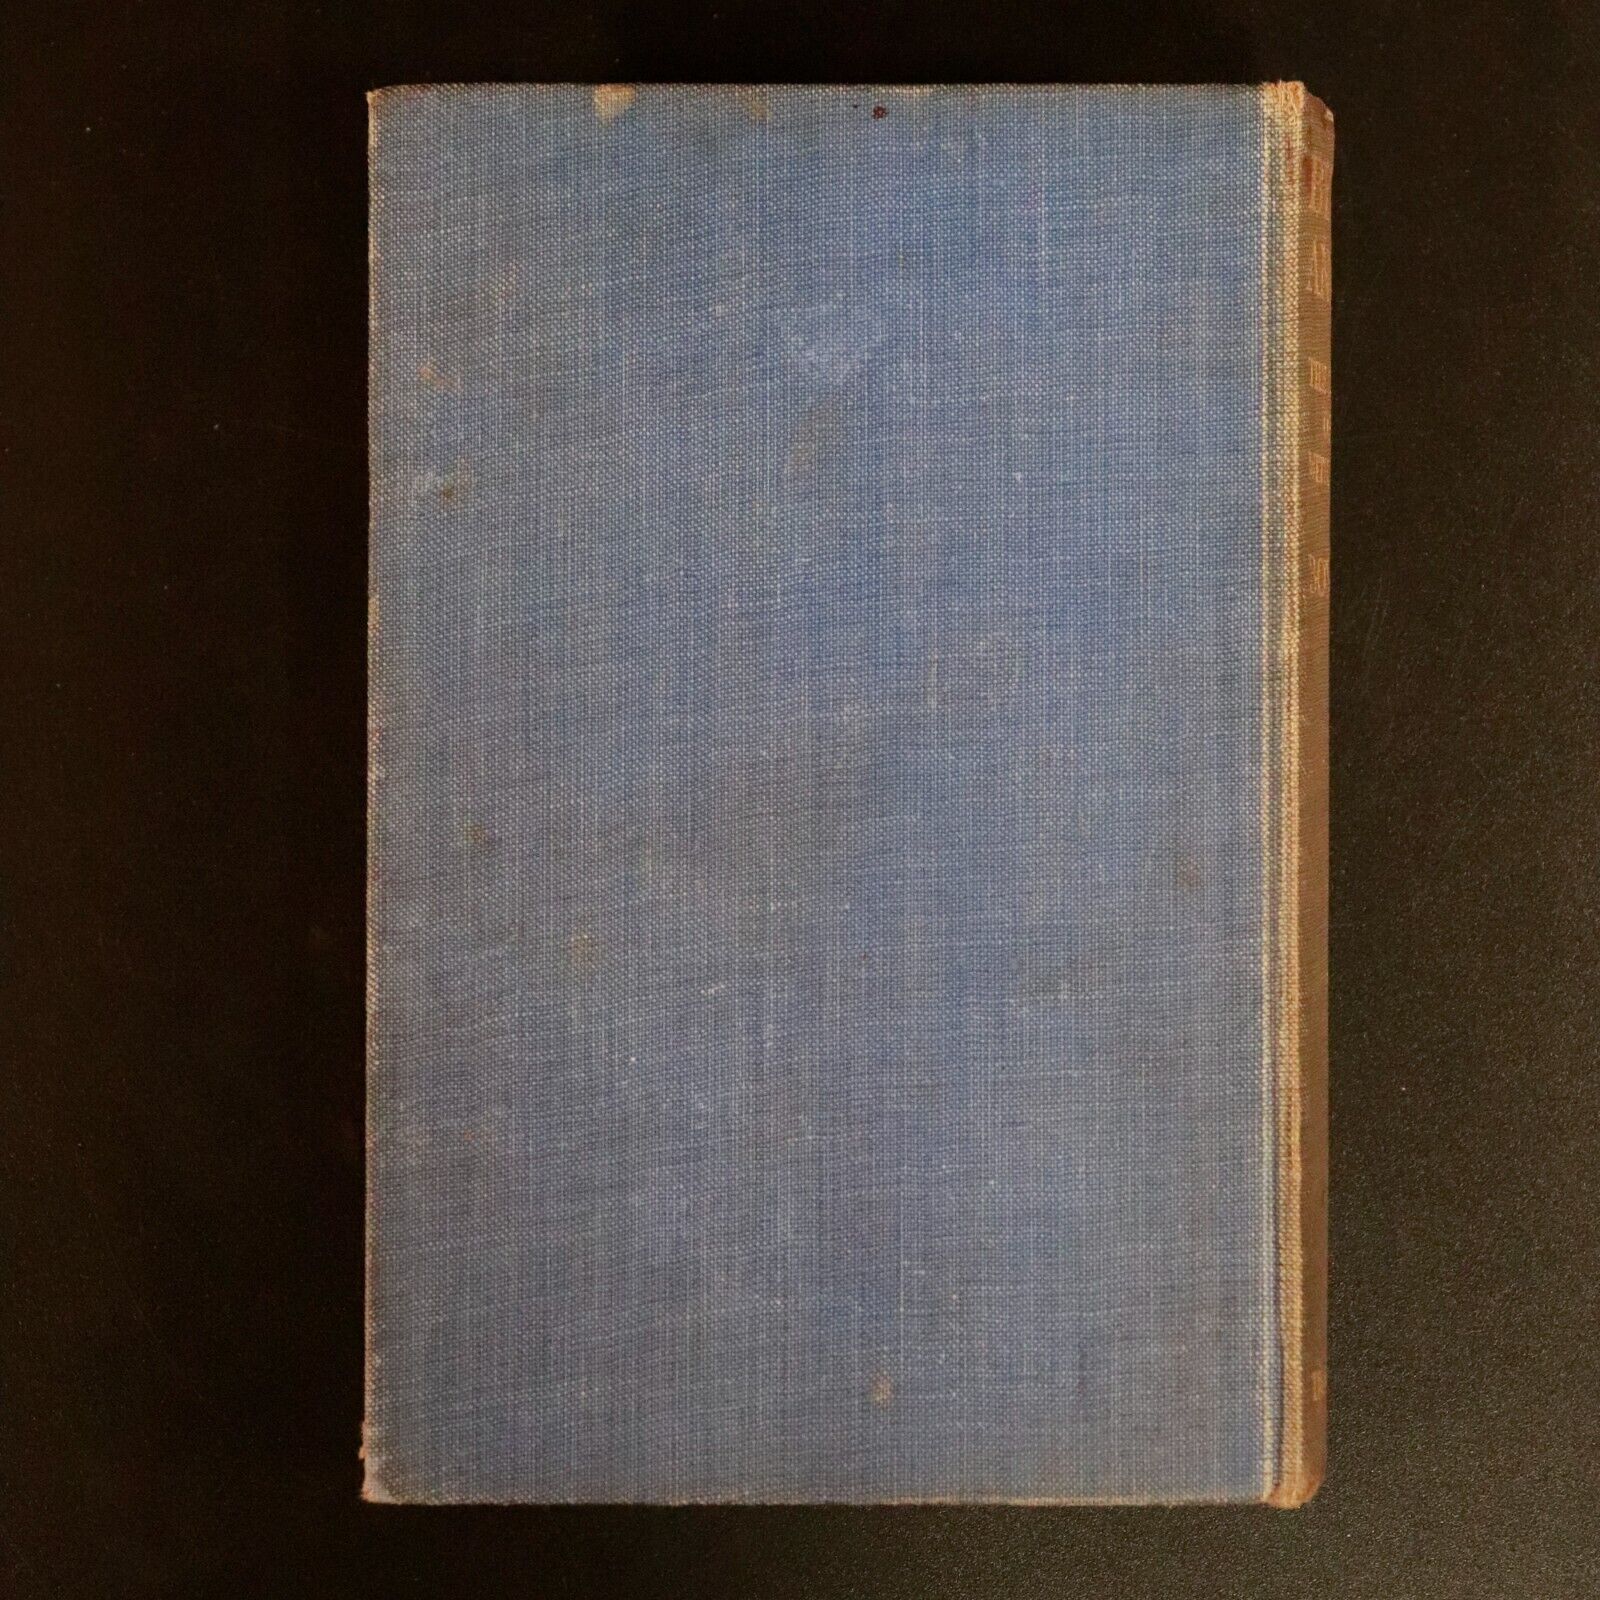 1914 By Blow & Kiss by Boyd Cable 1st Edition Antique Australian Fiction Book